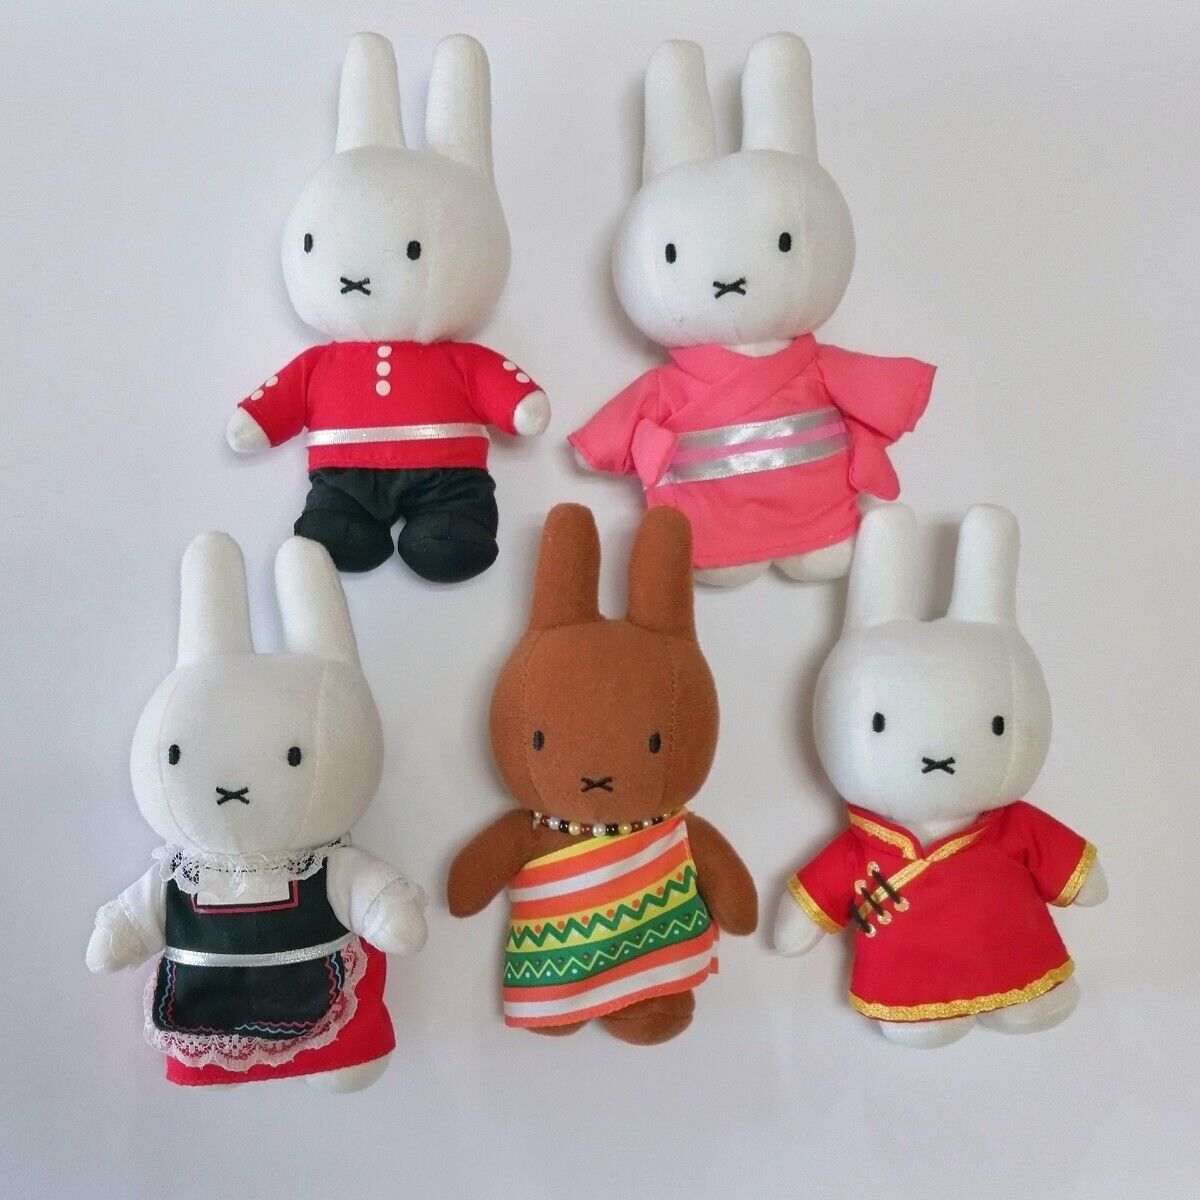 Miffy Plush Dolls in Traditional Costumes, Set of 5 Rare